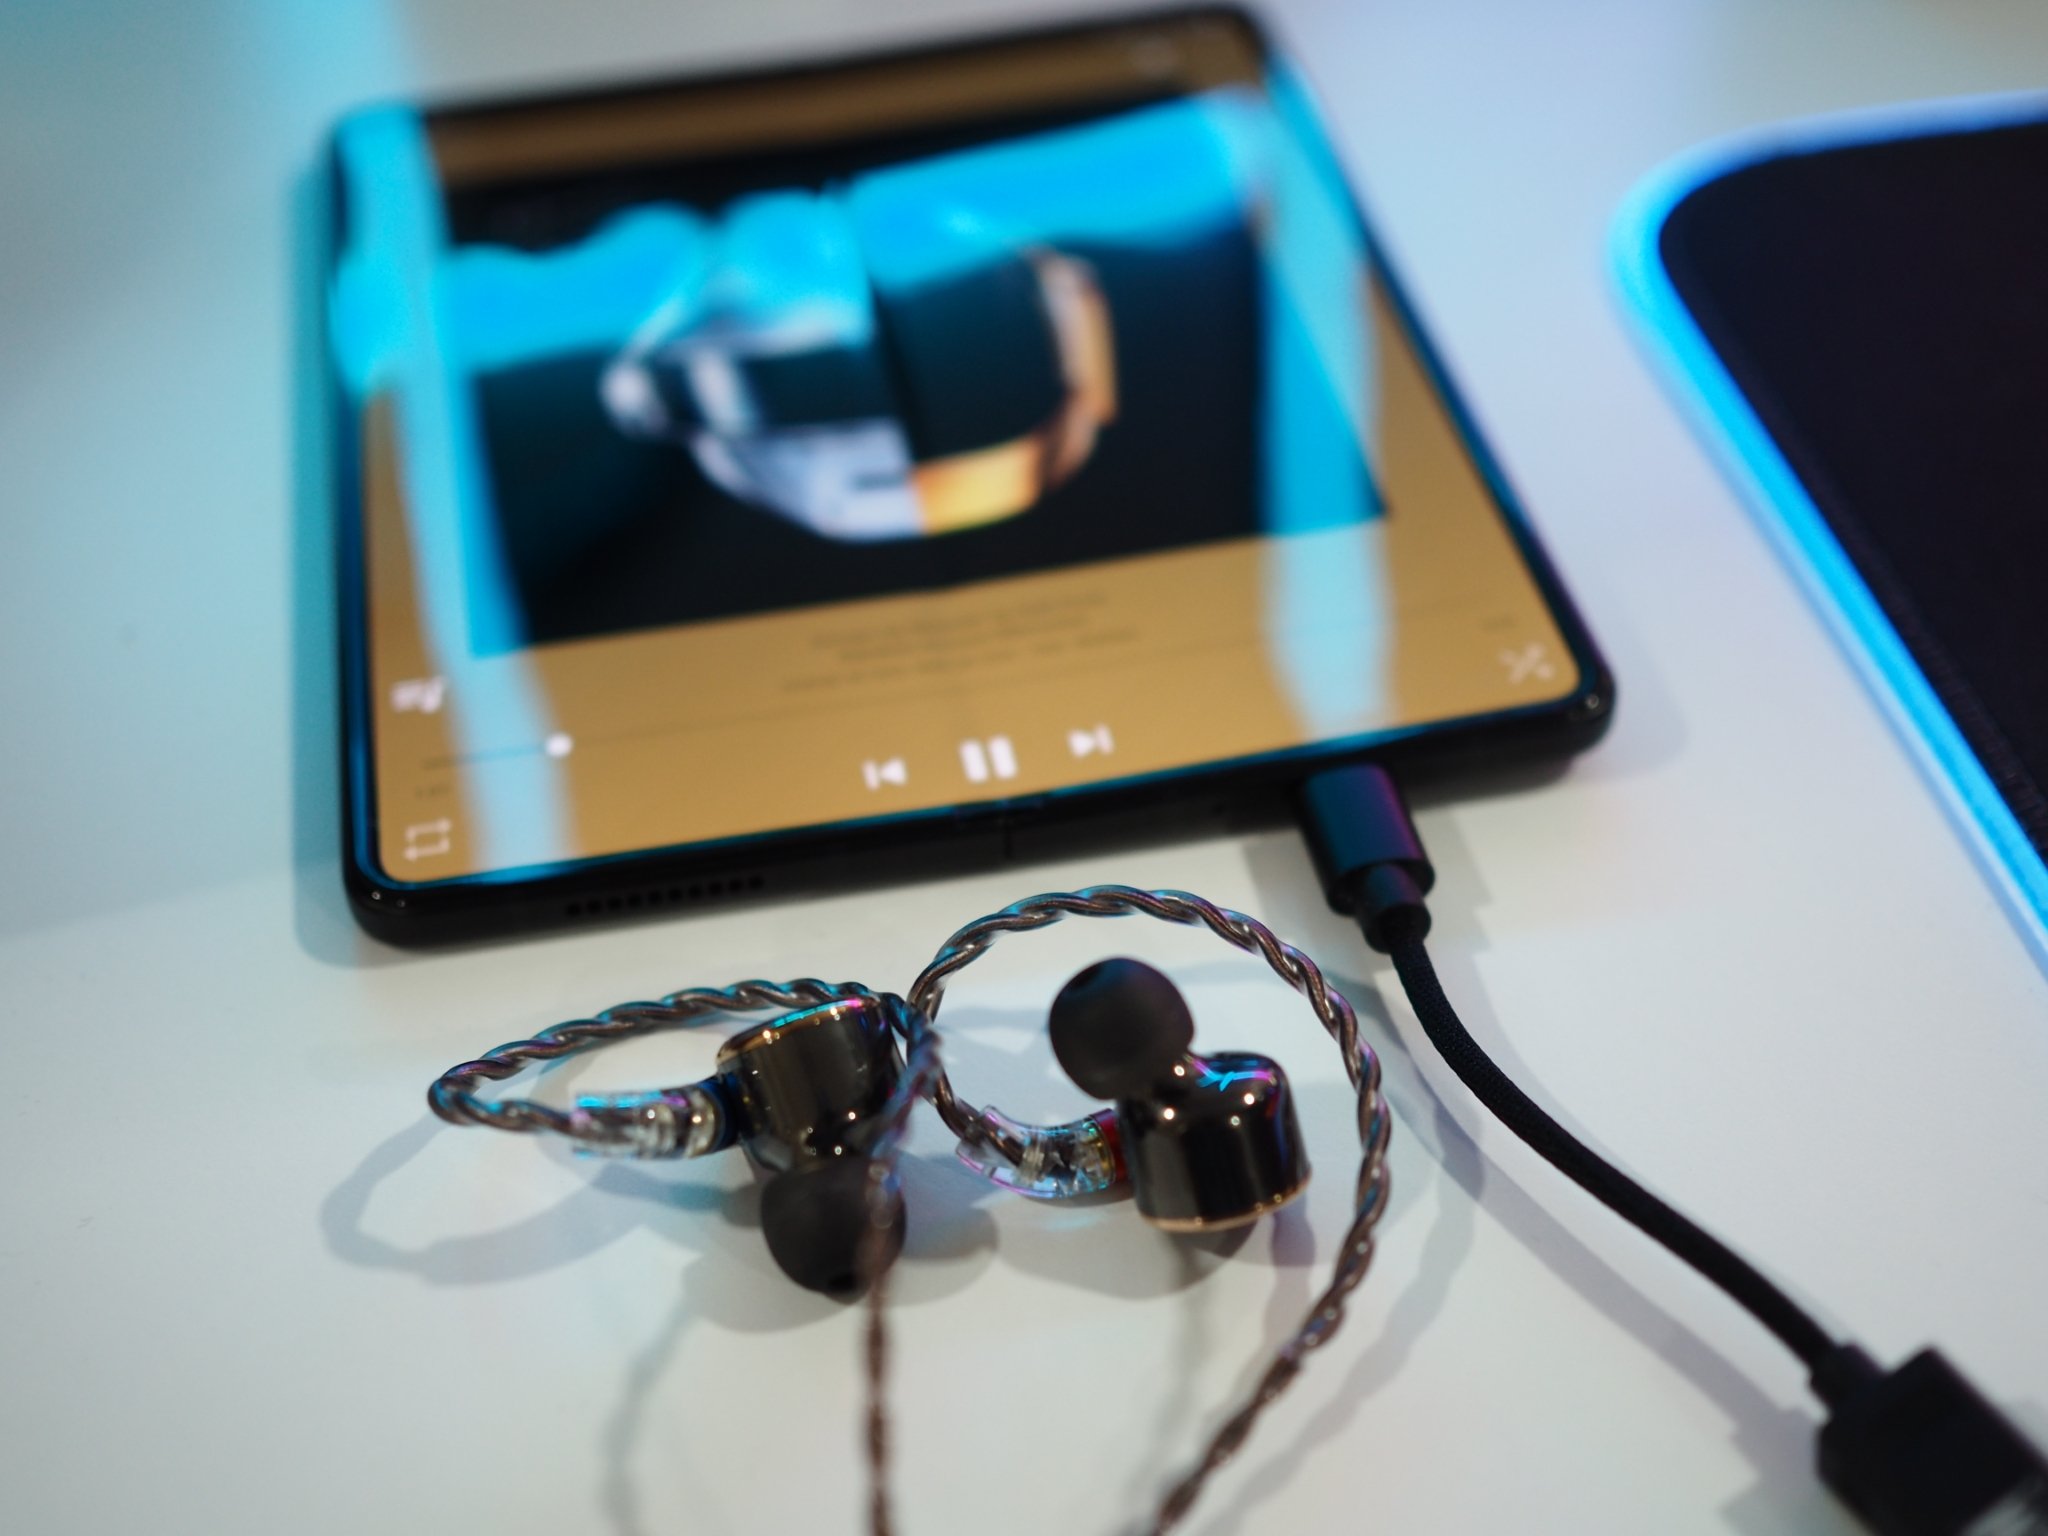 Fiio FD3 wired earbuds